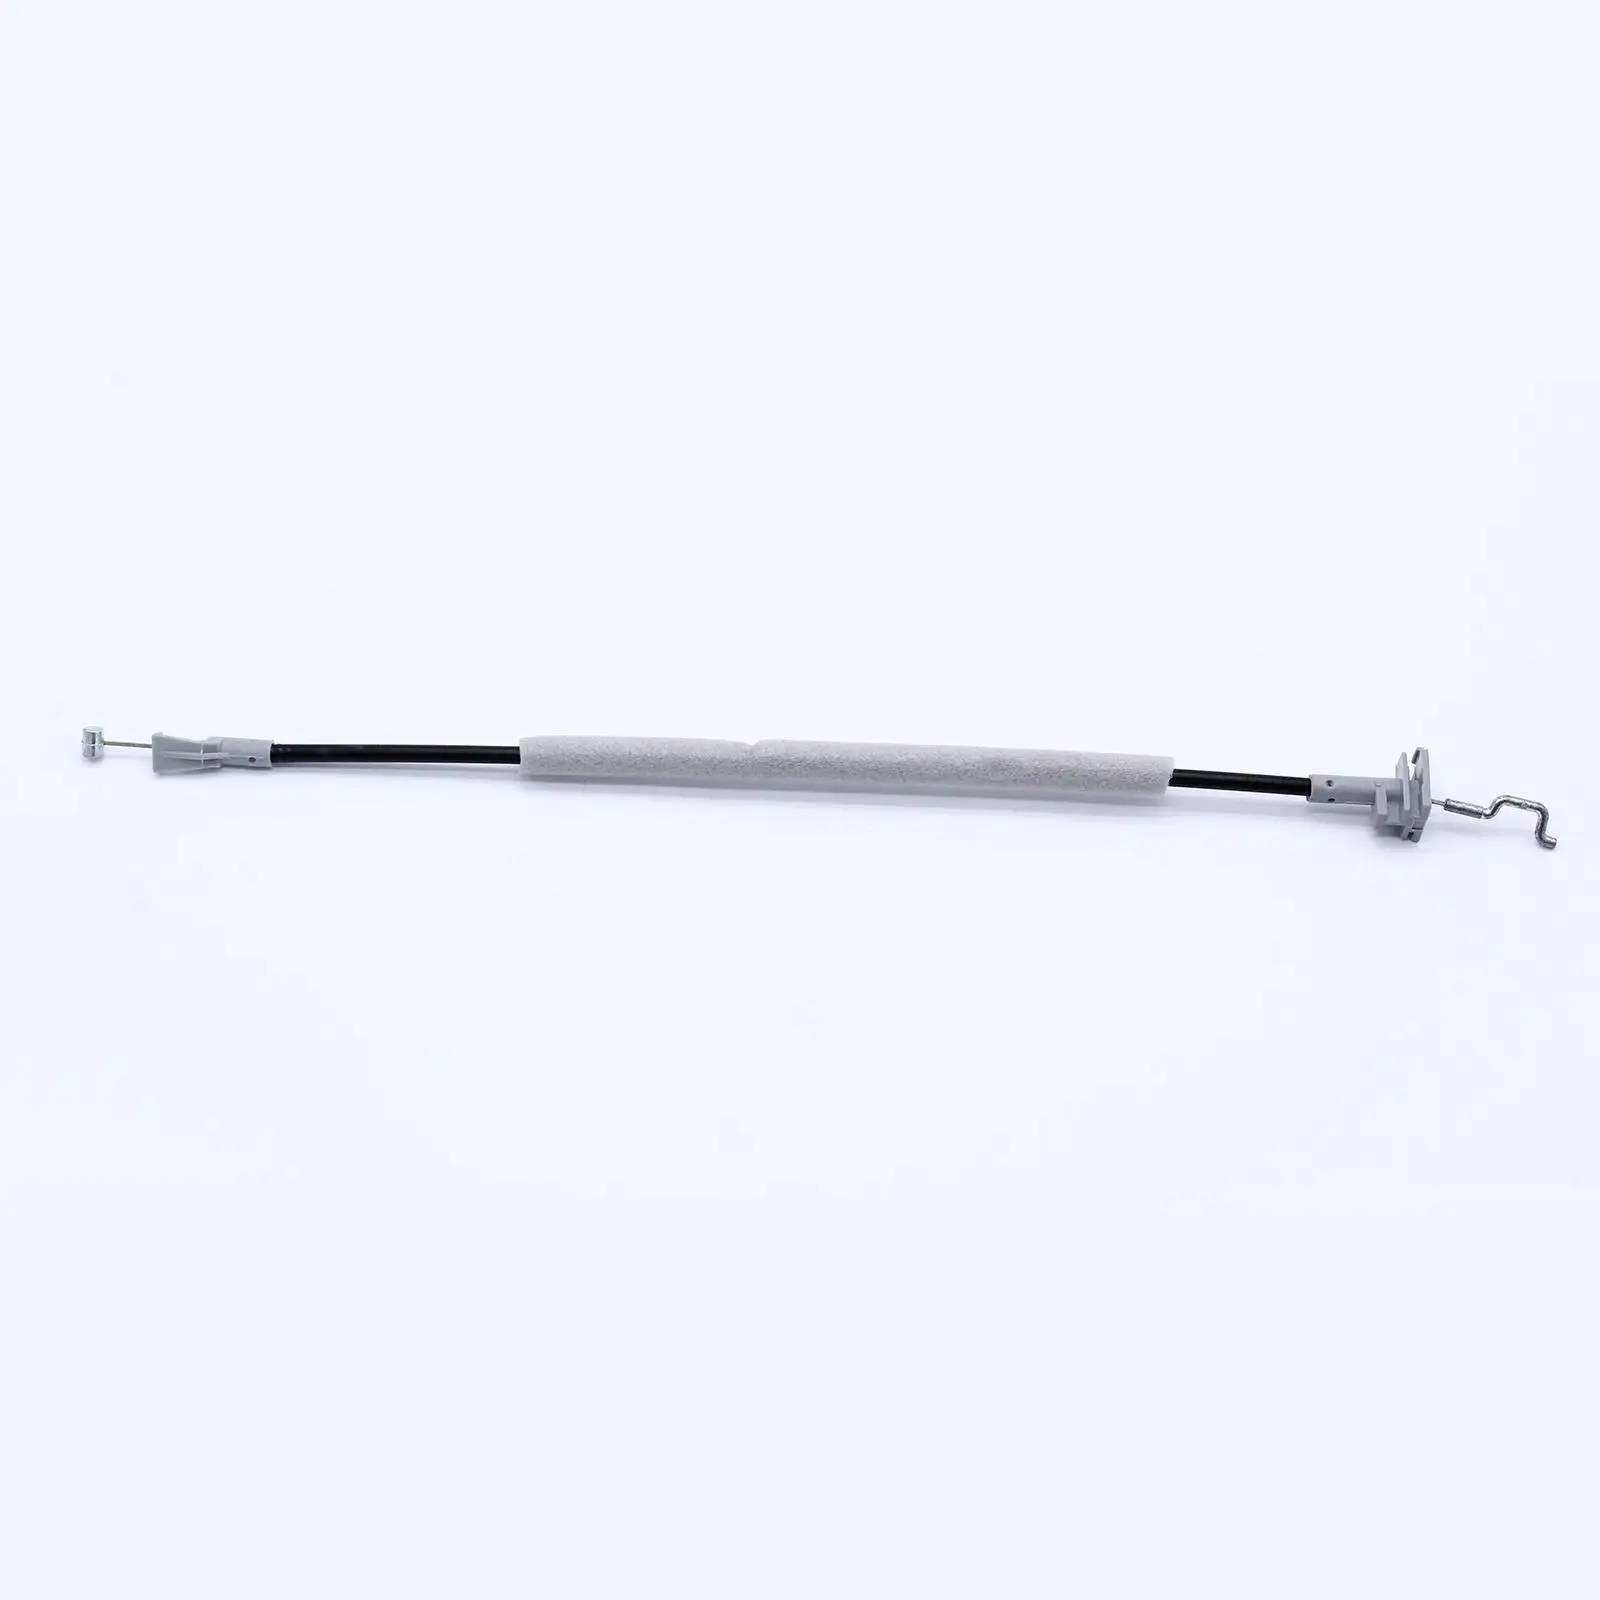 Car Front Door Locking Release Rod Cable Fits for Vauxhall Signum 2003-2008 Vectra C 2002-2008 13231174 137822